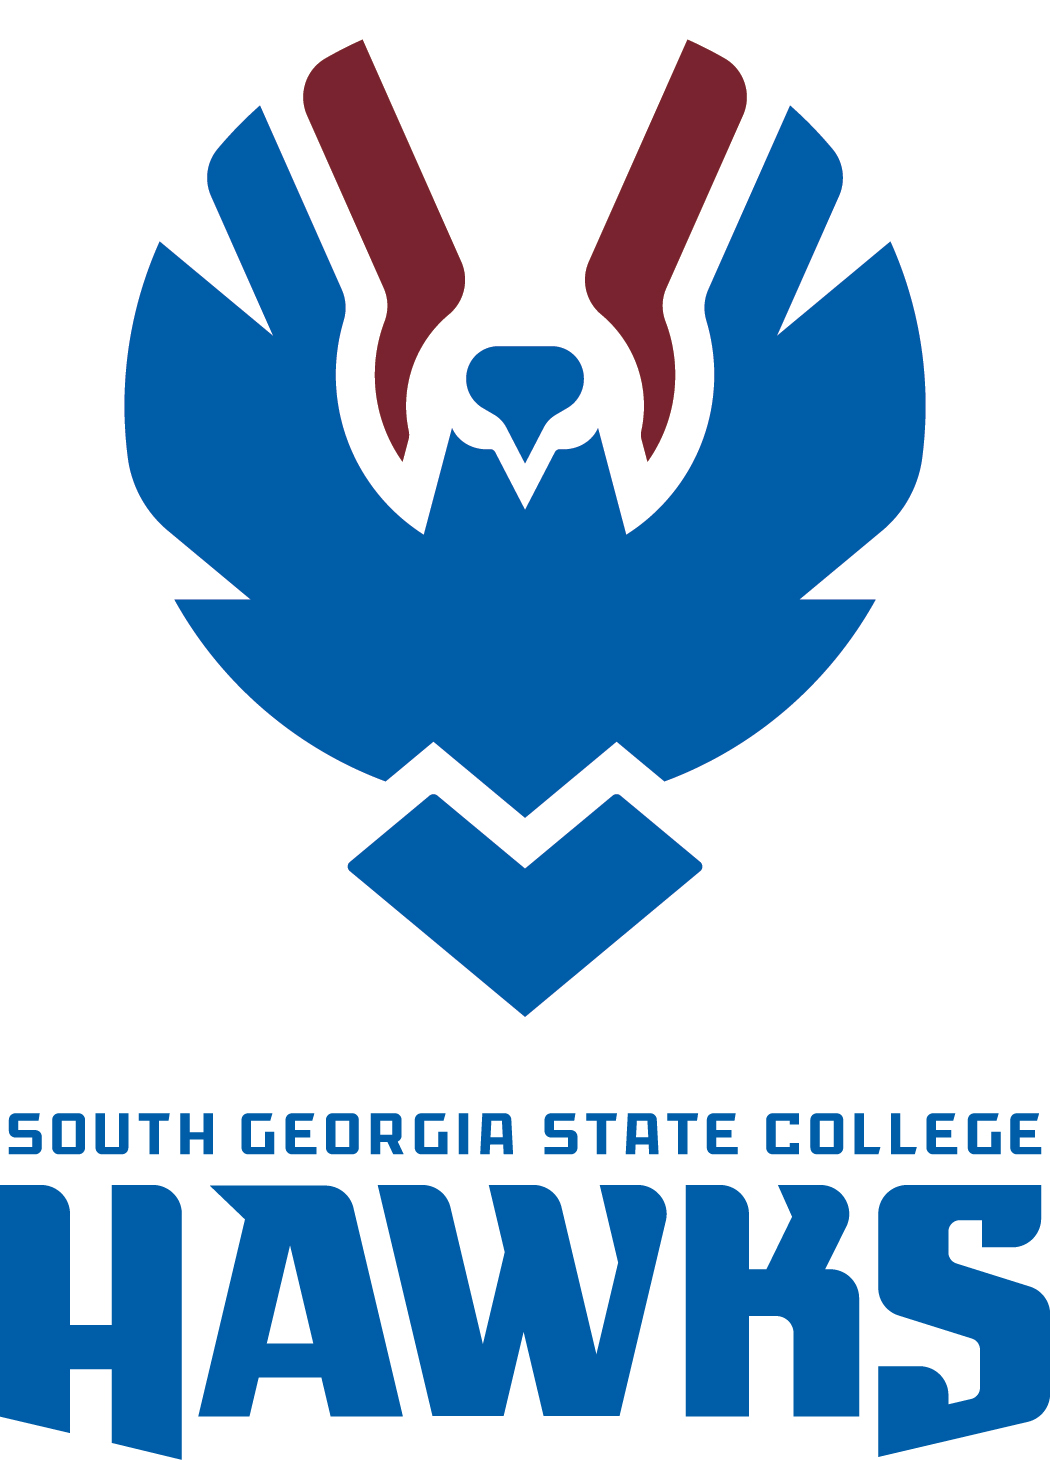 Featured Image: South Georgia State